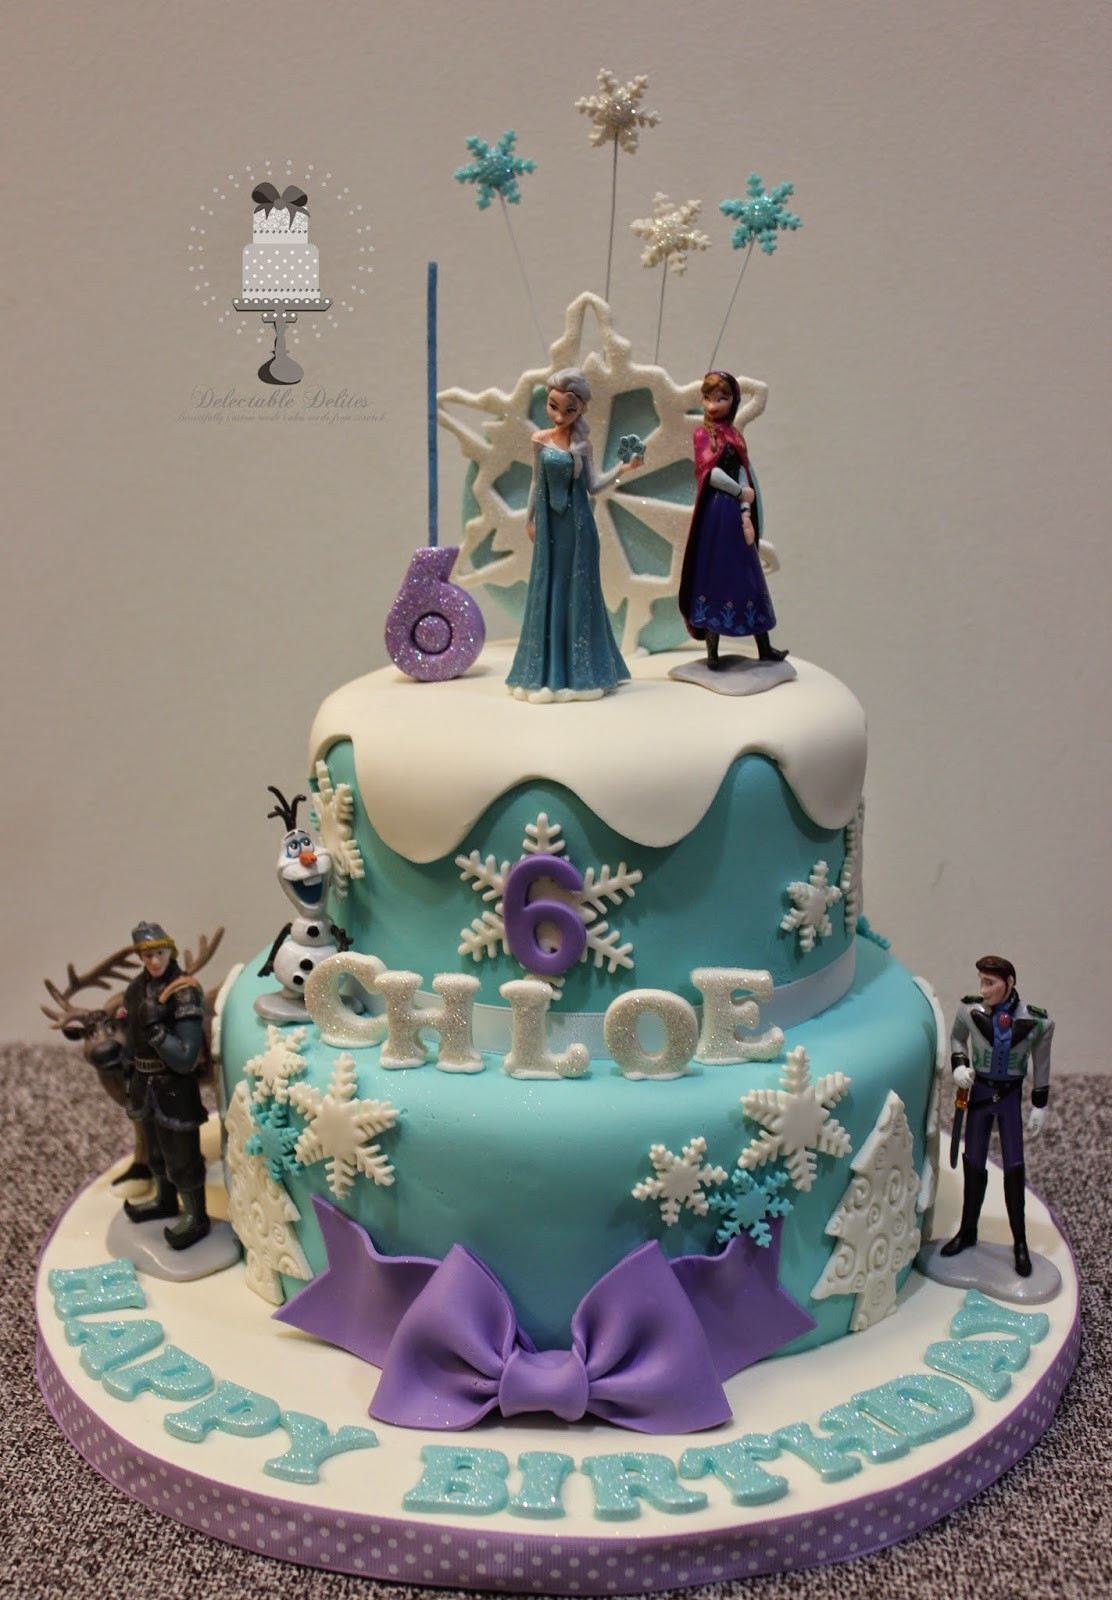 Frozen Birthday Cake Decorations
 Delectable Delites Frozen cake for Chole s 6th birthday